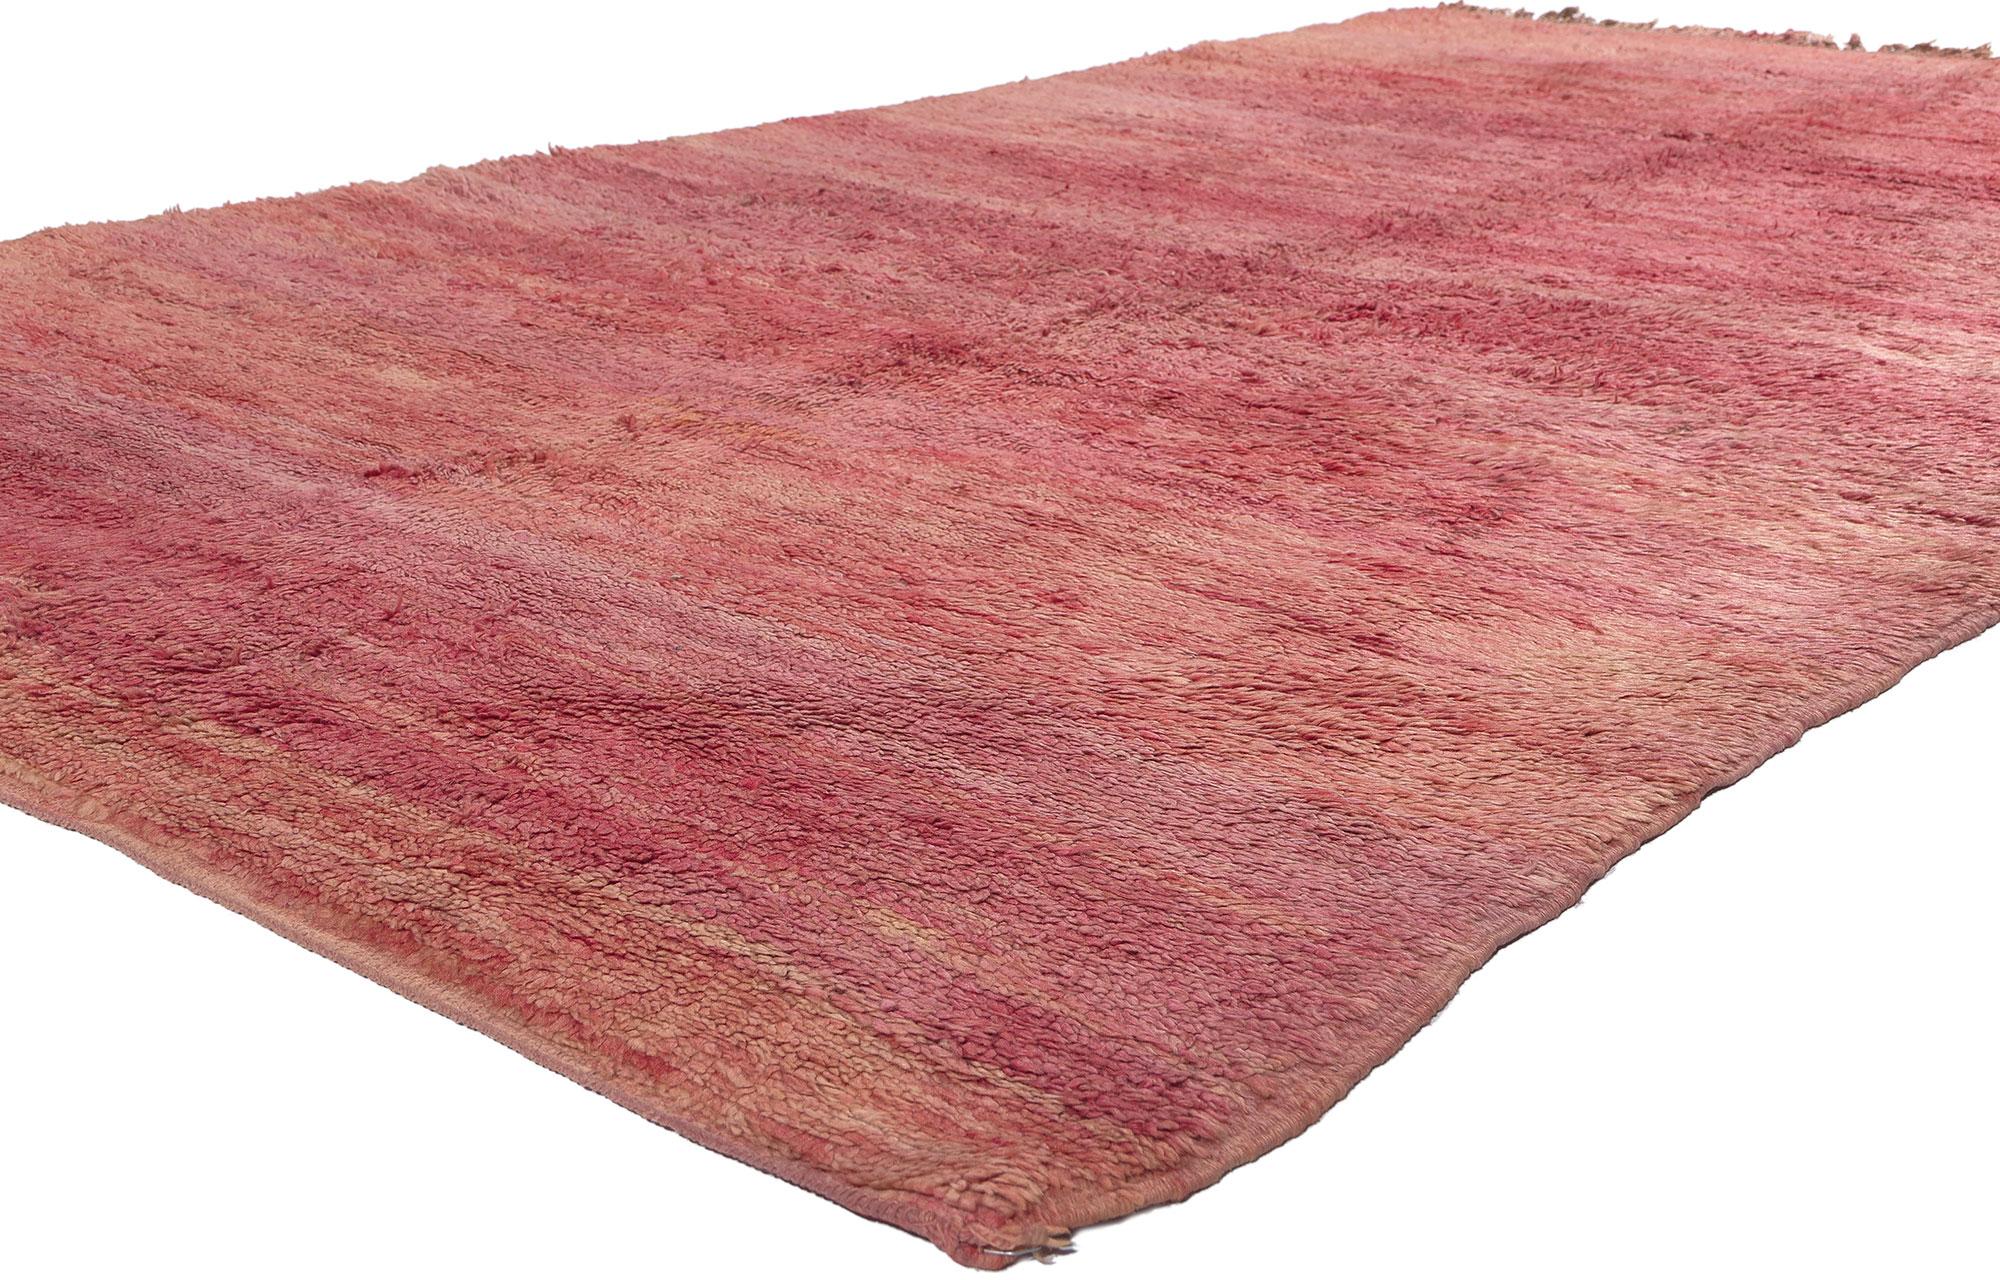 21063 Vintage Pink Beni Mrirt Moroccan Rug, 05'11 x 10'05. Embark on an enchanting voyage through the serene world of modern aesthetics with this meticulously hand-knotted wool rug from the Beni Mrirt tribe in Morocco. A true masterpiece born in the